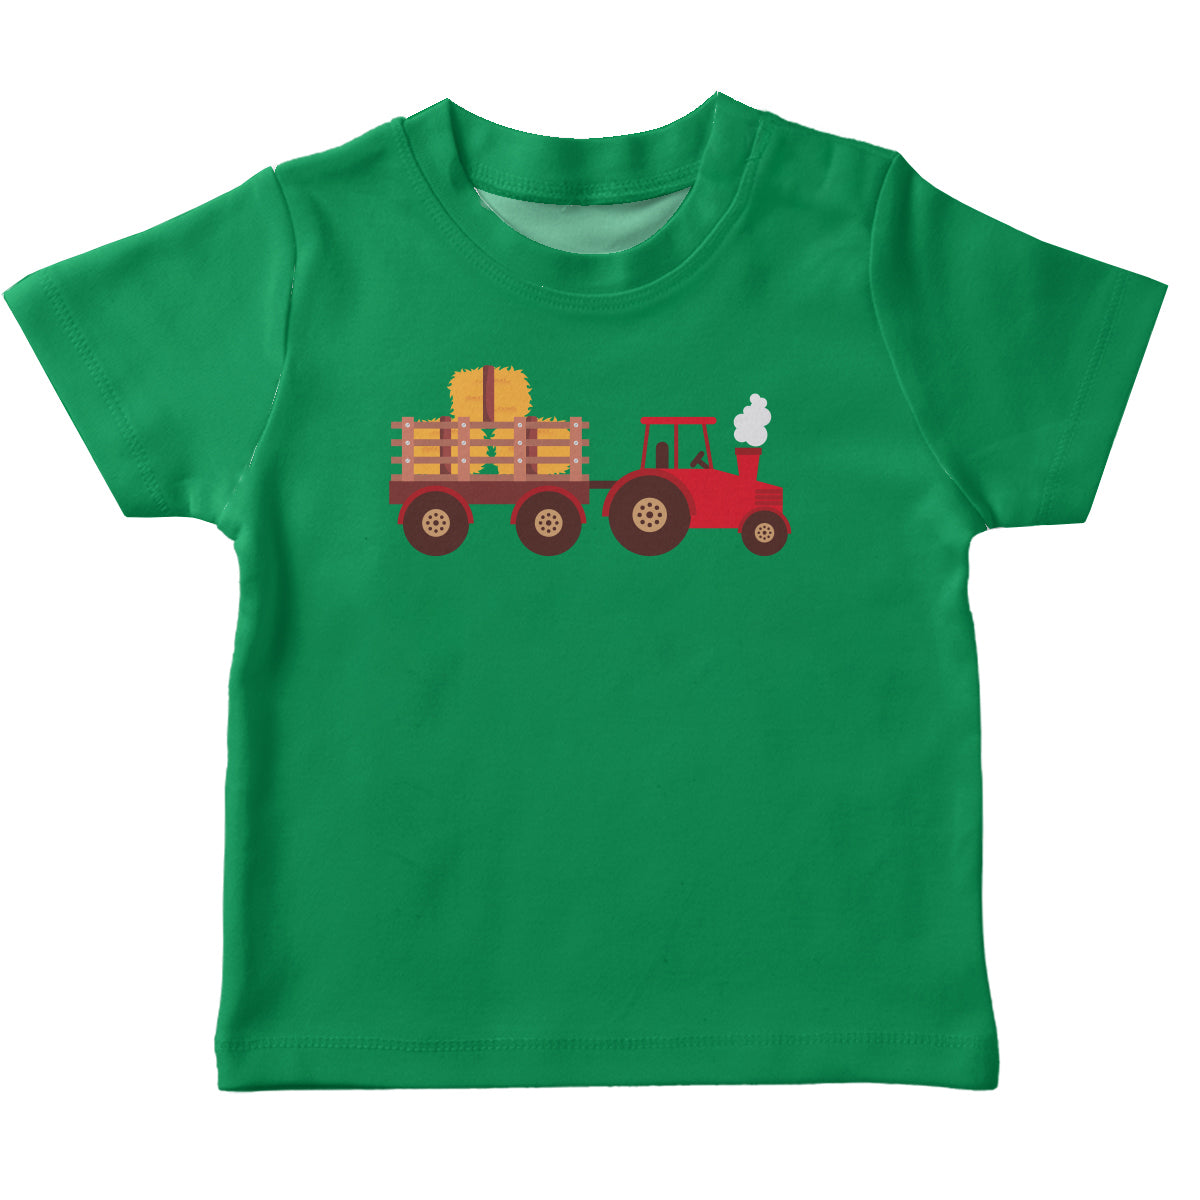 Green short sleeve boys tee shirt with tractor and name - Wimziy&Co.